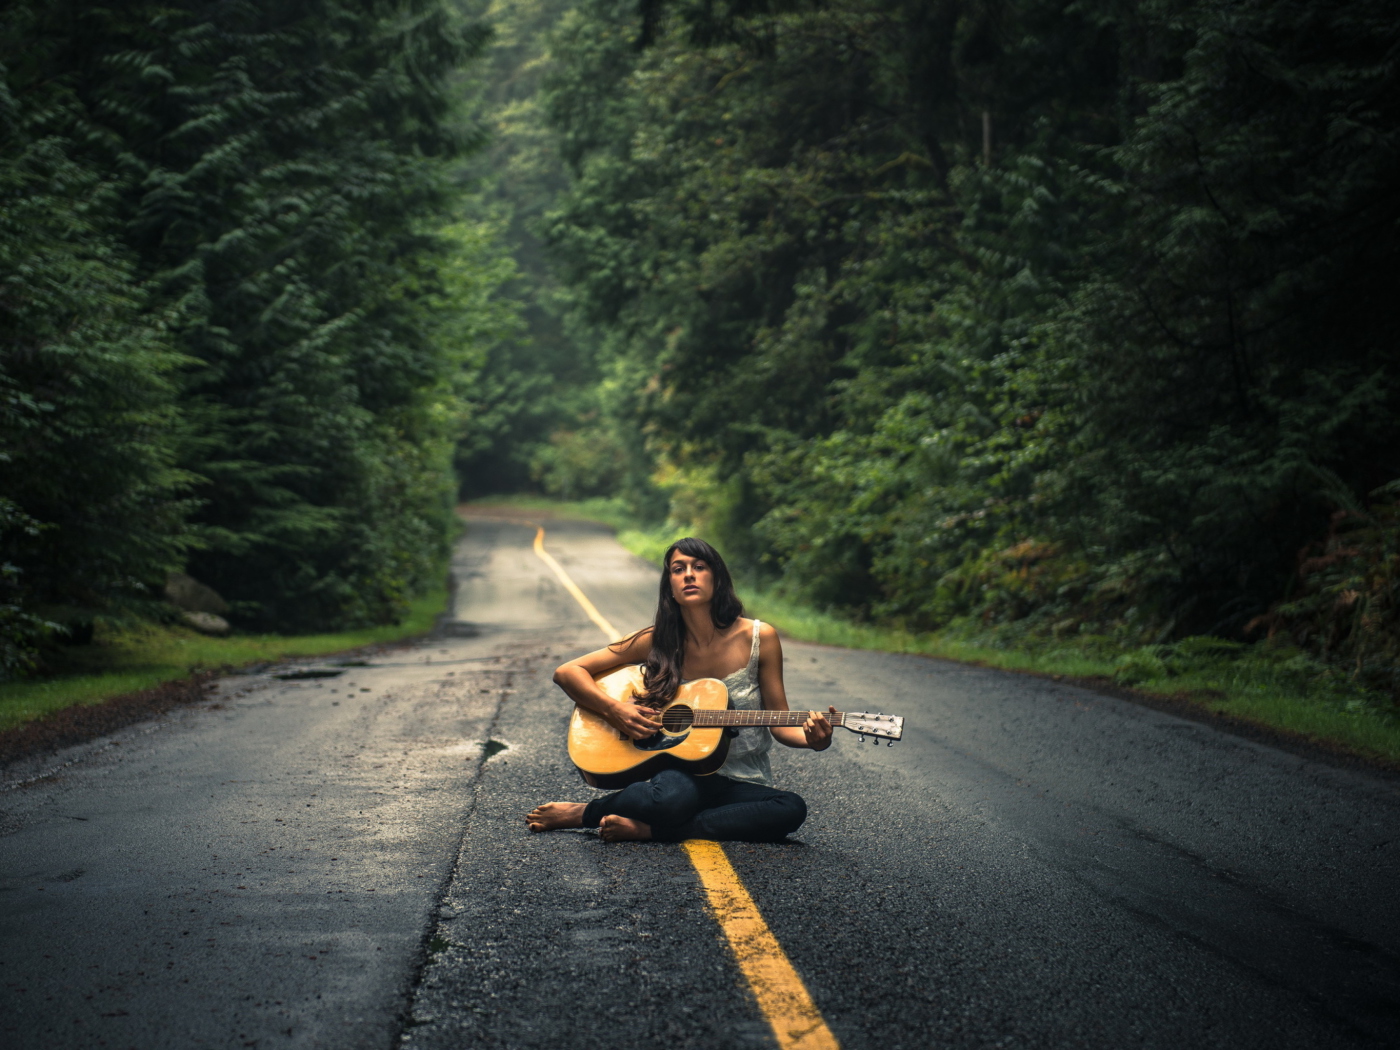 Das Girl Playing Guitar On Countryside Road Wallpaper 1400x1050